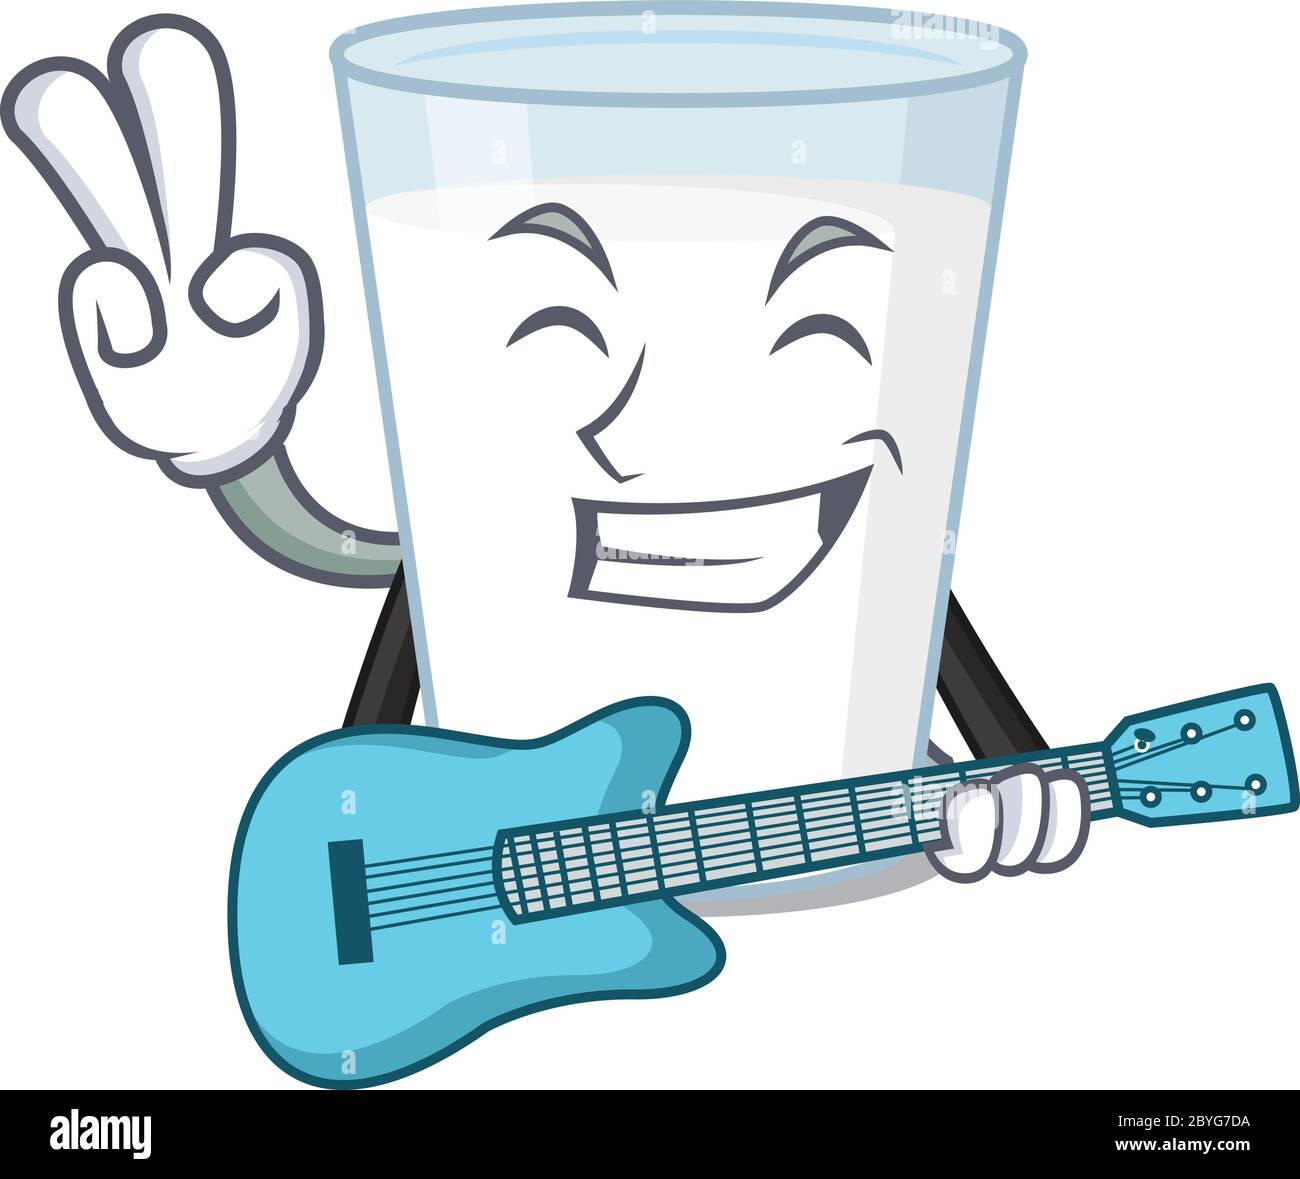 brilliant musician of glass of milk cartoon design playing music with a guitar Stock Vector